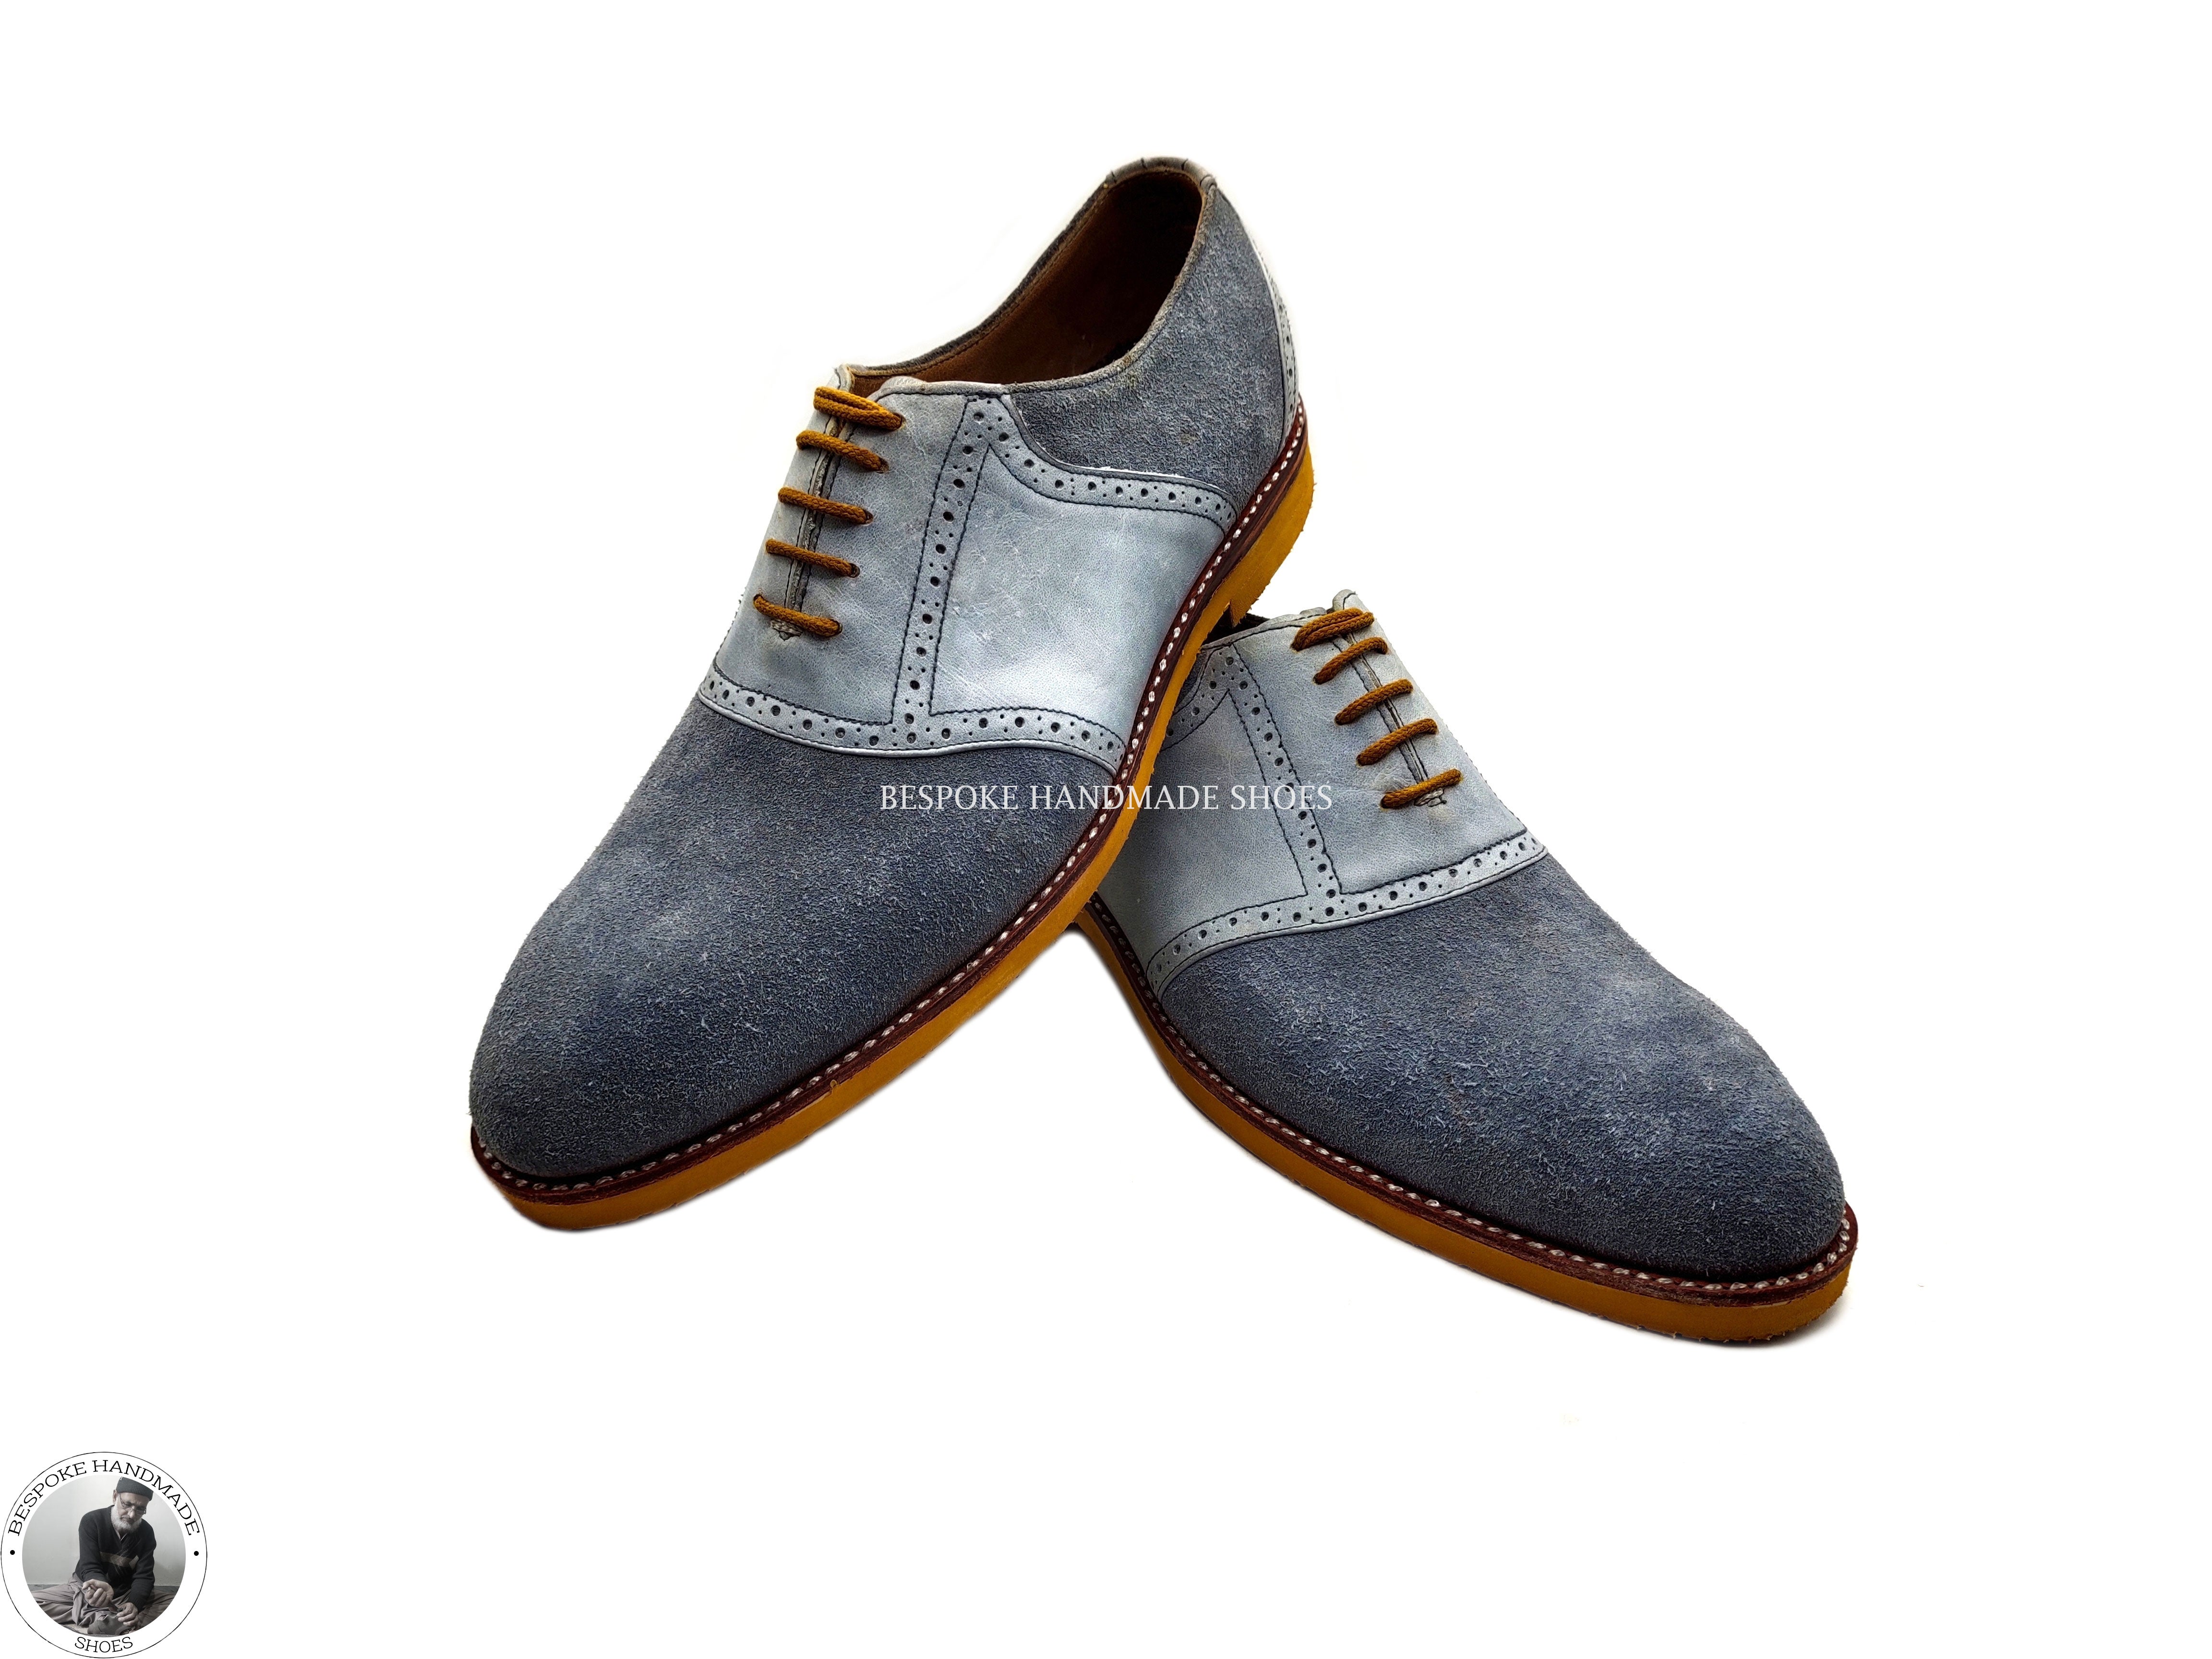 Custom Made Bespoke Men's Blue Leather and Suede Oxford Lace Up Vibram Sole Dress Shoes